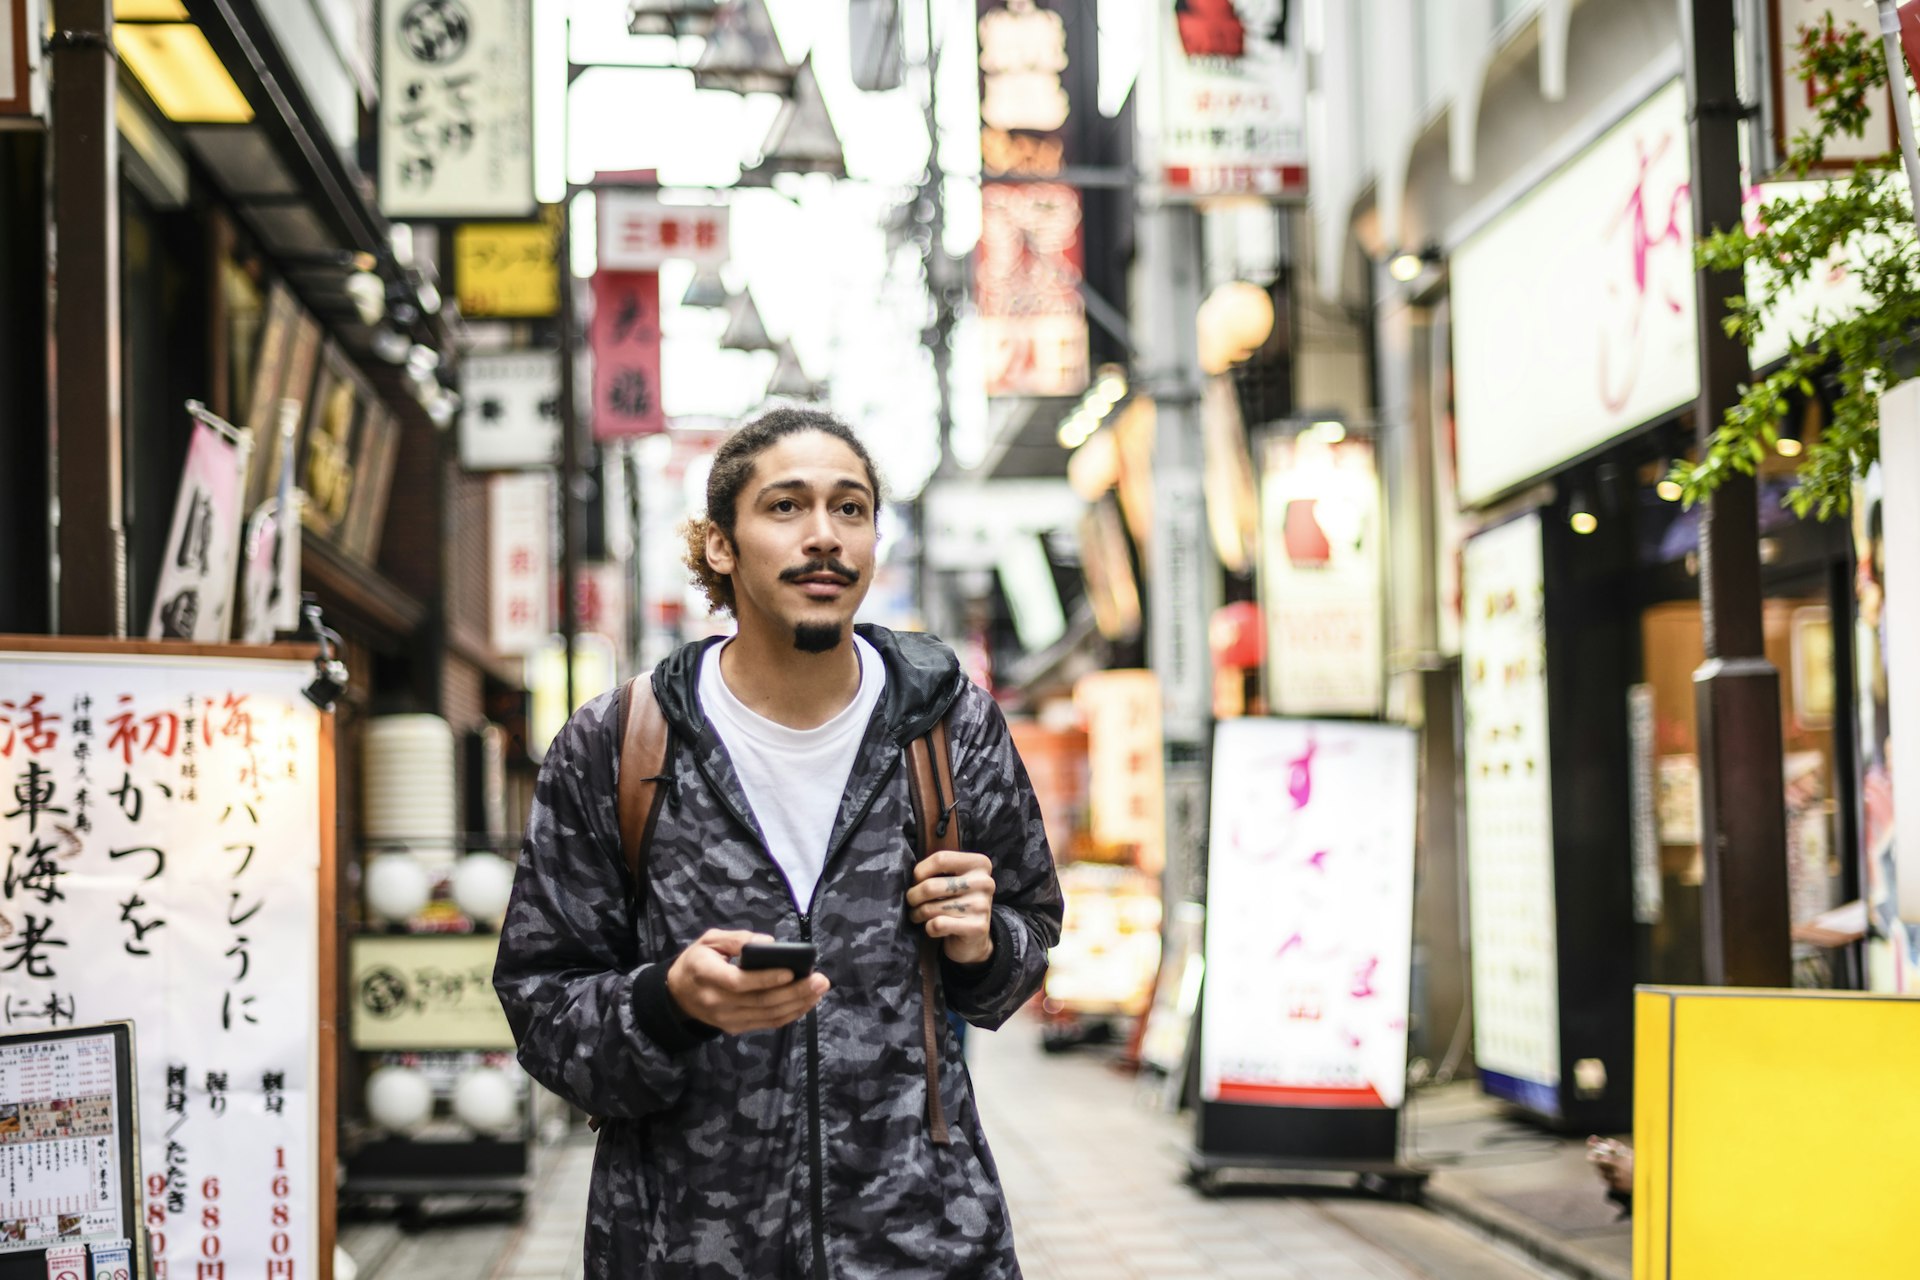 A young man walks down an urban street holding his phone. There are many Japanese signs on the buildings behind him